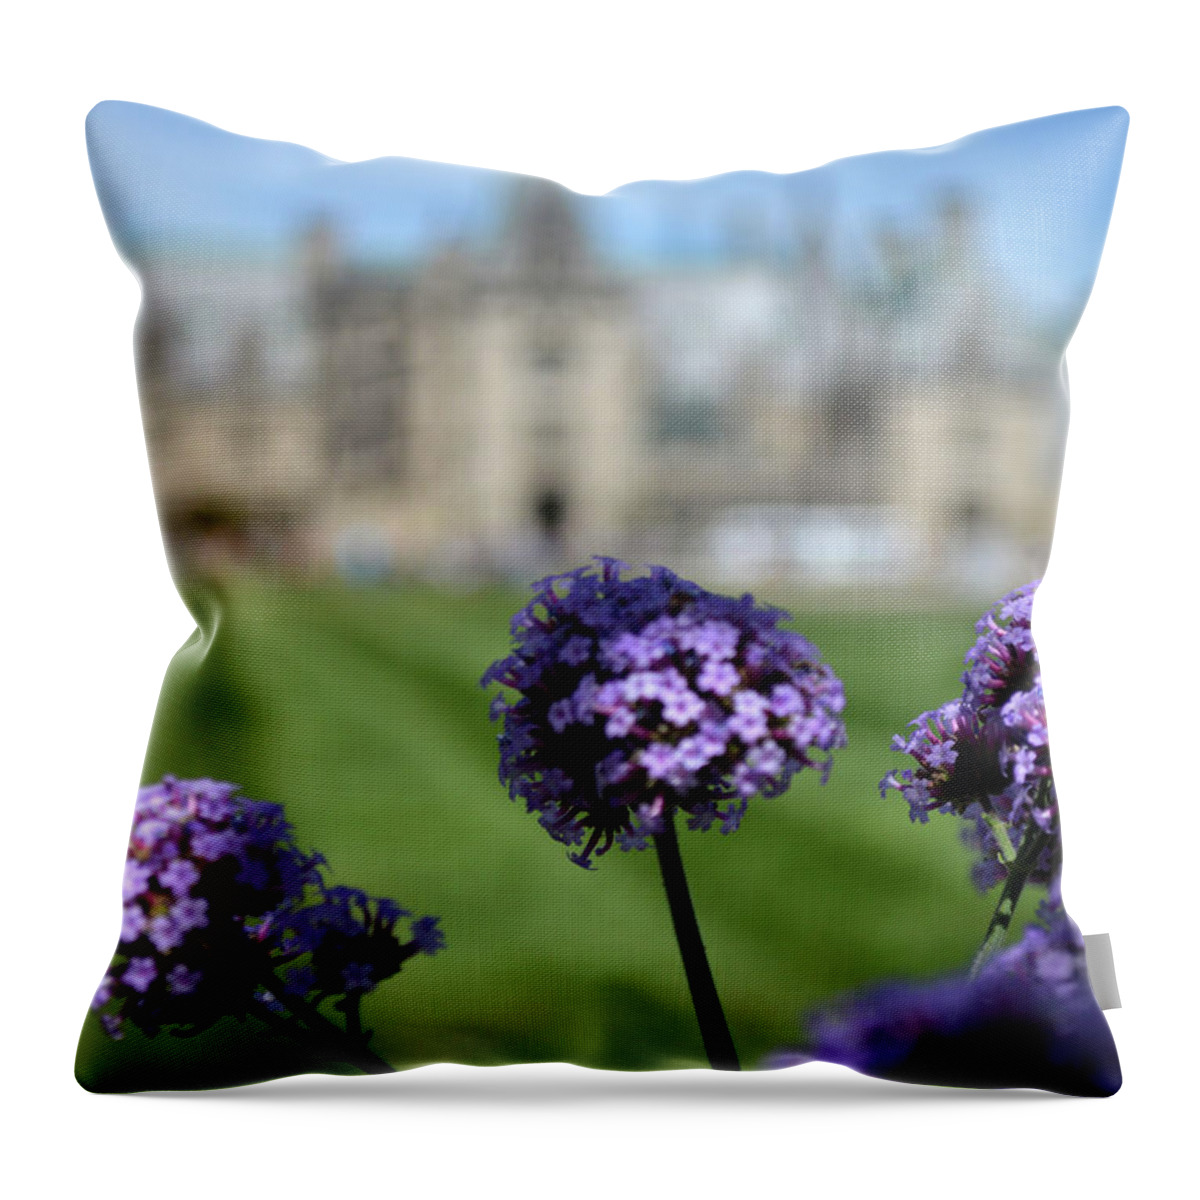 Biltmore Throw Pillow featuring the photograph Biltmore Beauty by Lisa Burbach